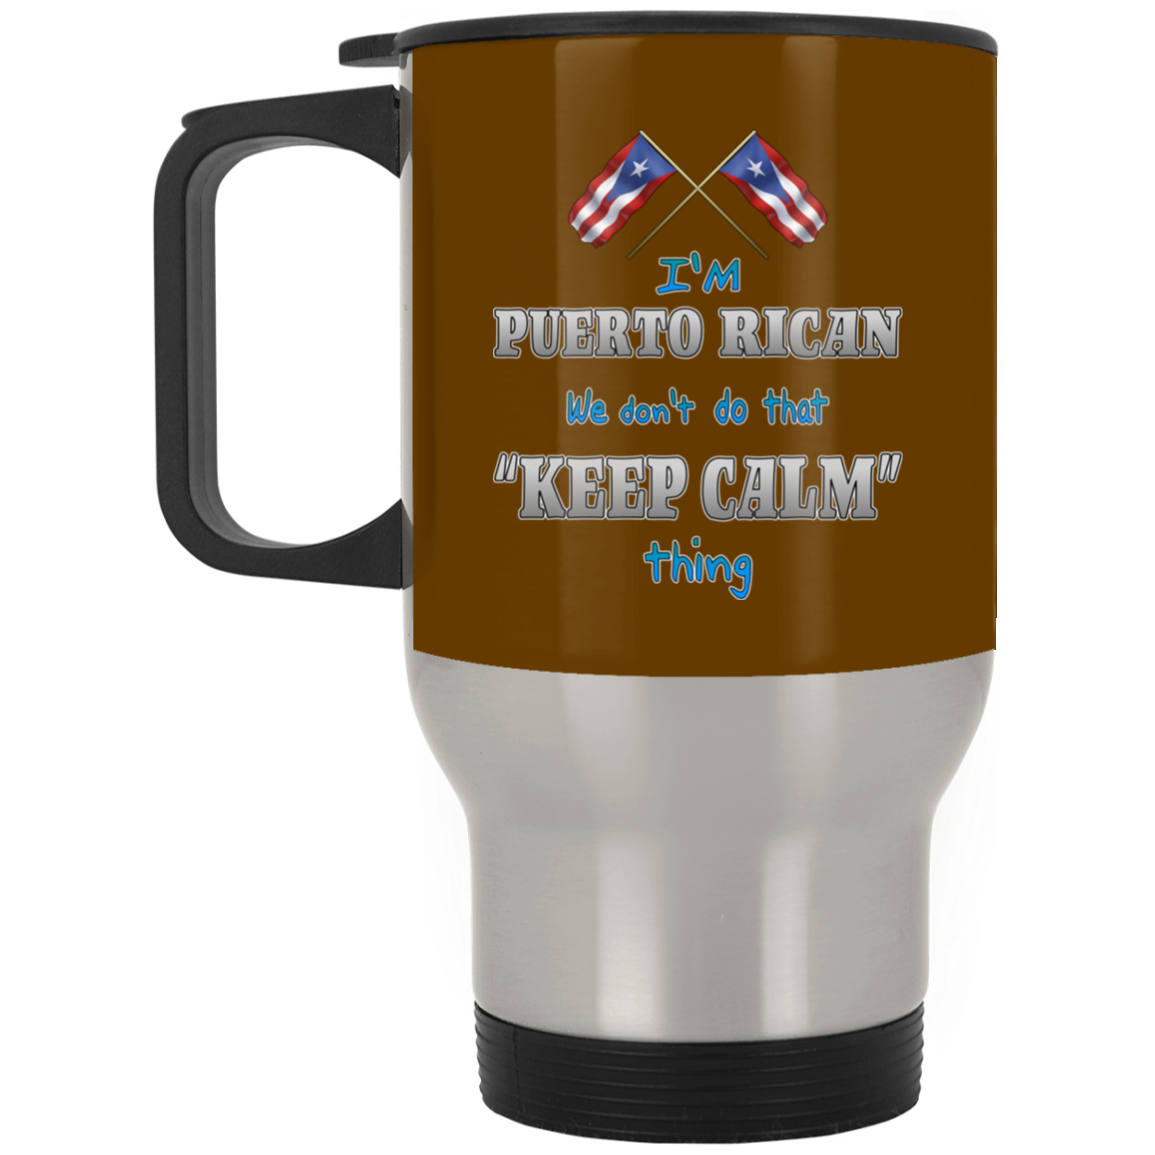 Don't Do Keep Calm Silver Stainless Travel Mug - Puerto Rican Pride